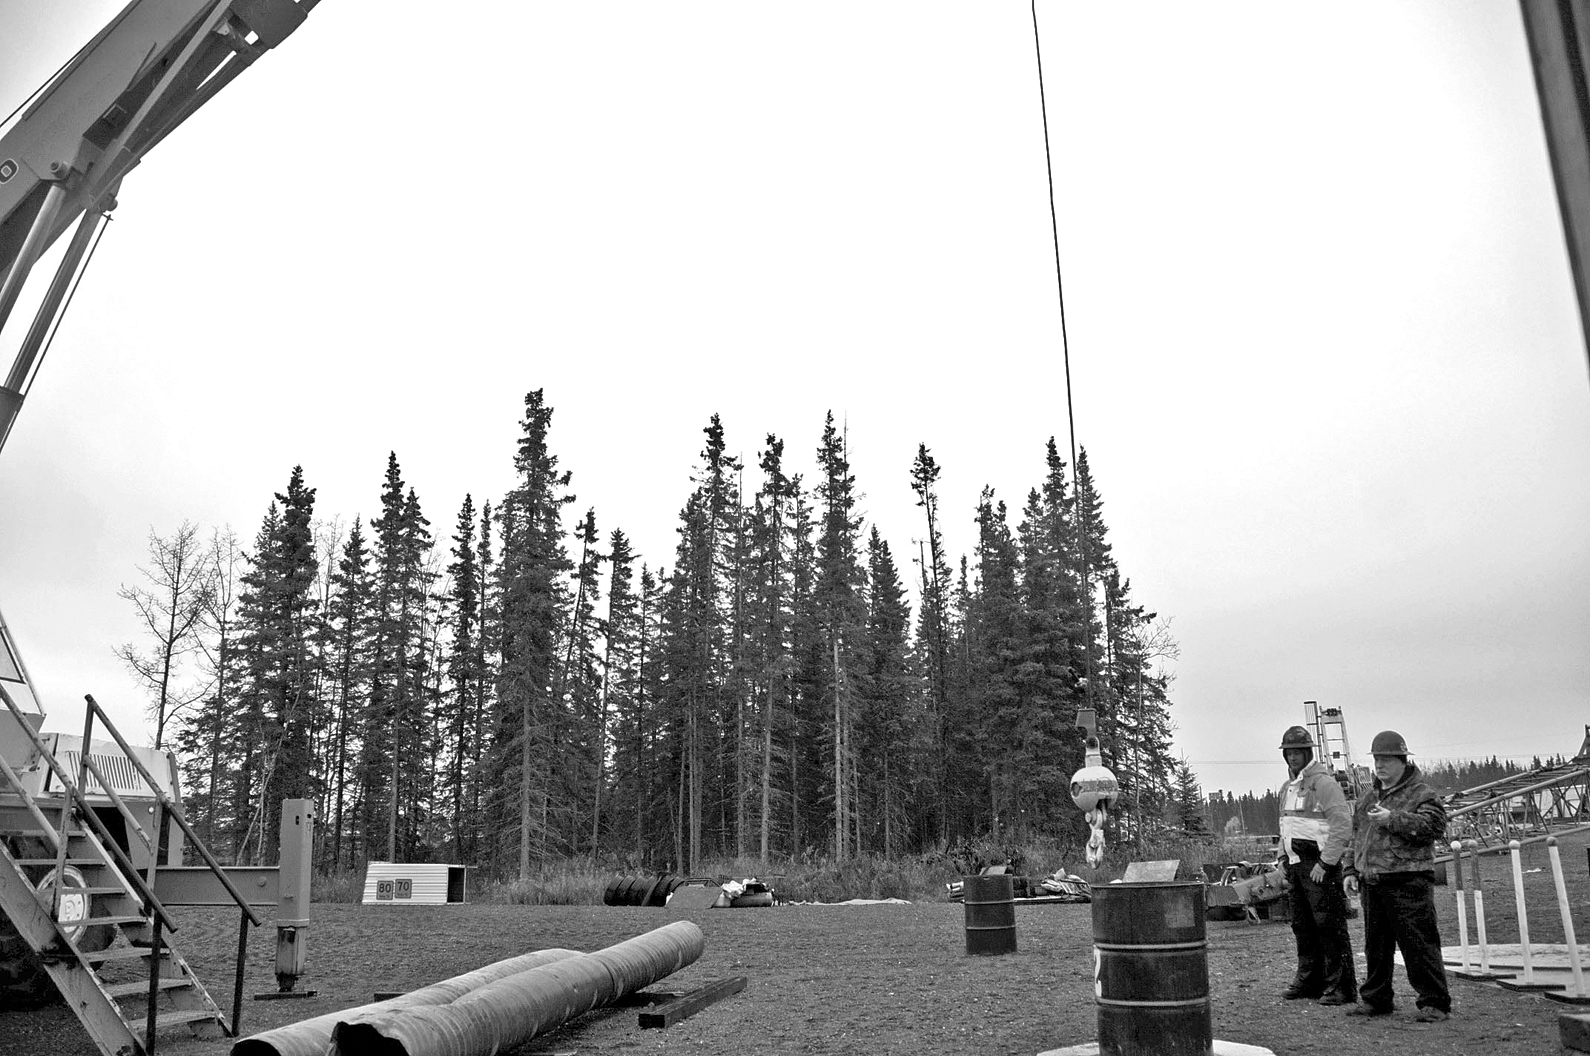 Bill Elmore and Daniel Barry watch and time Brandon Leary as he attempts to lower the auxiliary ball of a crane into a barrel, one of the certification practical exam requirements.-Photo by Elizabeth Earl, Morris News Service - Alaska